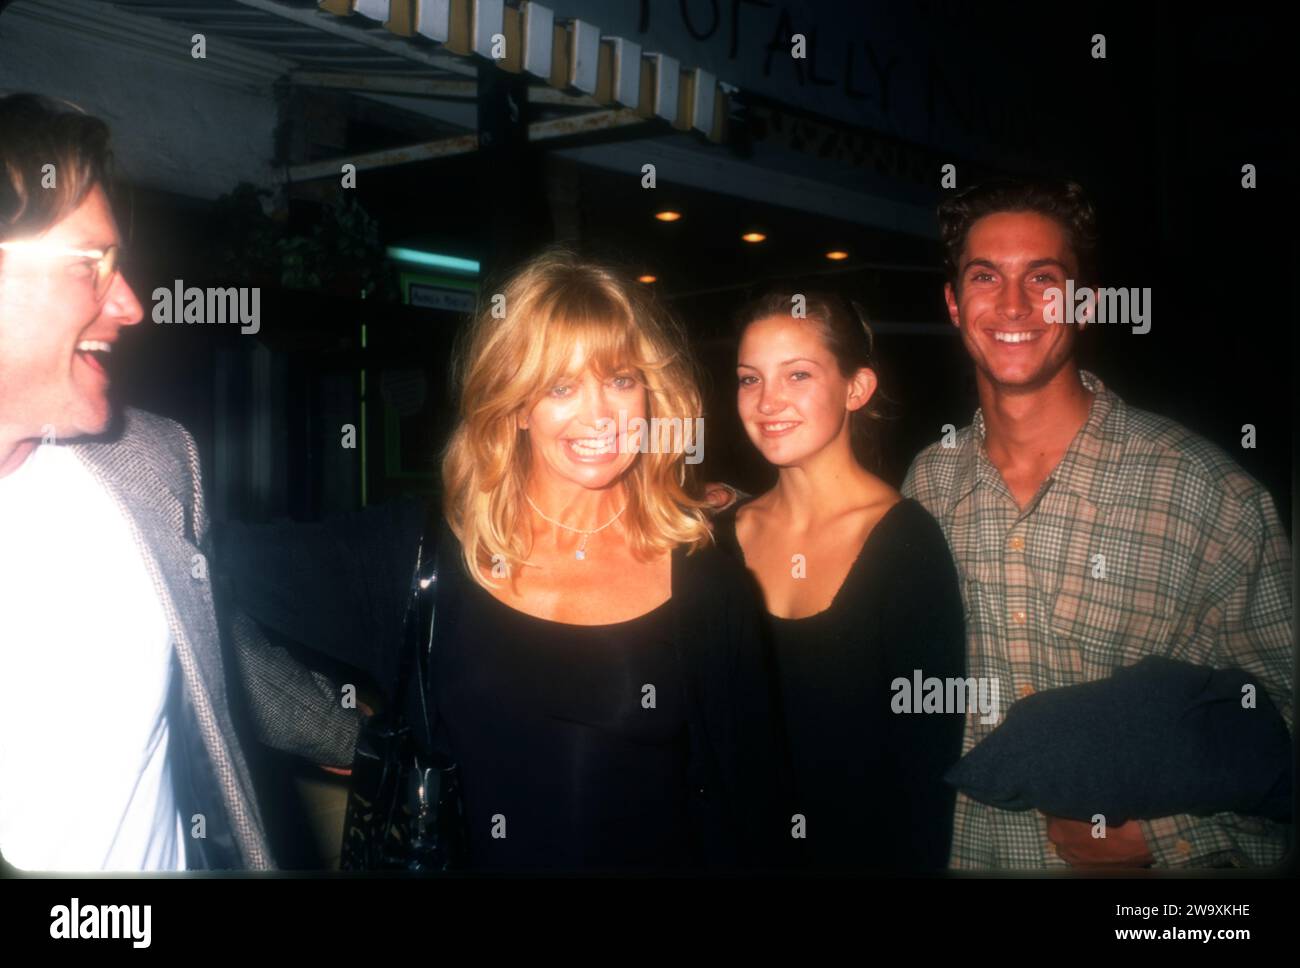 Los Angeles, California, USA 13th October 1996 (Exclusive) Actor Kurt Russell, Actress Goldie Hawn, daughter Actress Kate Hudson and son Actor Oliver Hudson on October 13, 1996 in Los Angeles, California, USA. Photo by Barry King/Alamy Stock Photo Stock Photo